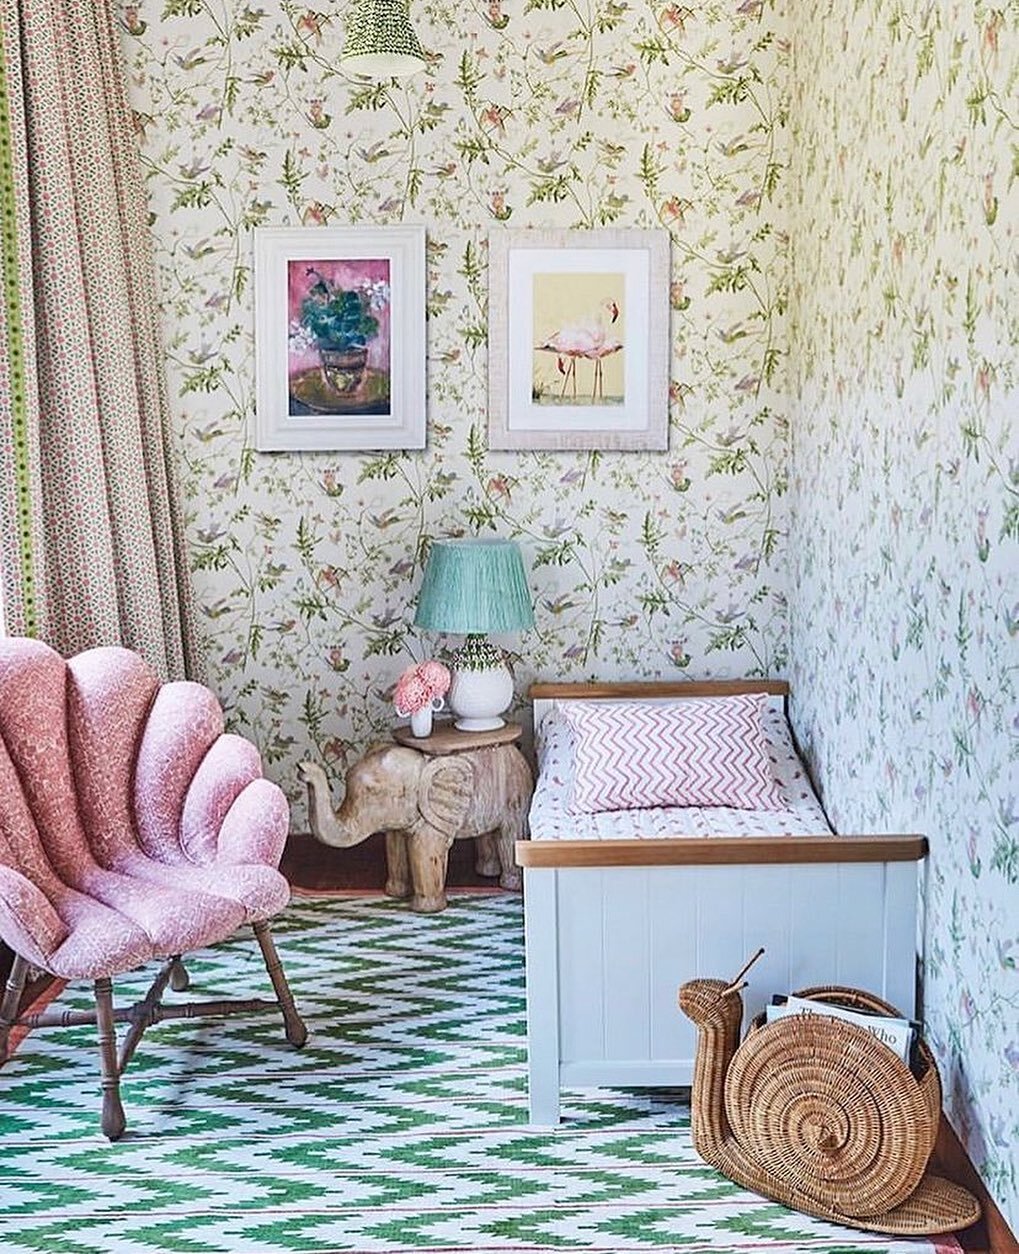 A very pretty bedroom designed by the talented @elizabethhaydesign which features such a fun vintage rattan snail magazine rack which I sourced a few years ago 🐌 I love seeing photos of where my finds end up living around the world! 📸 Credit: Eliza